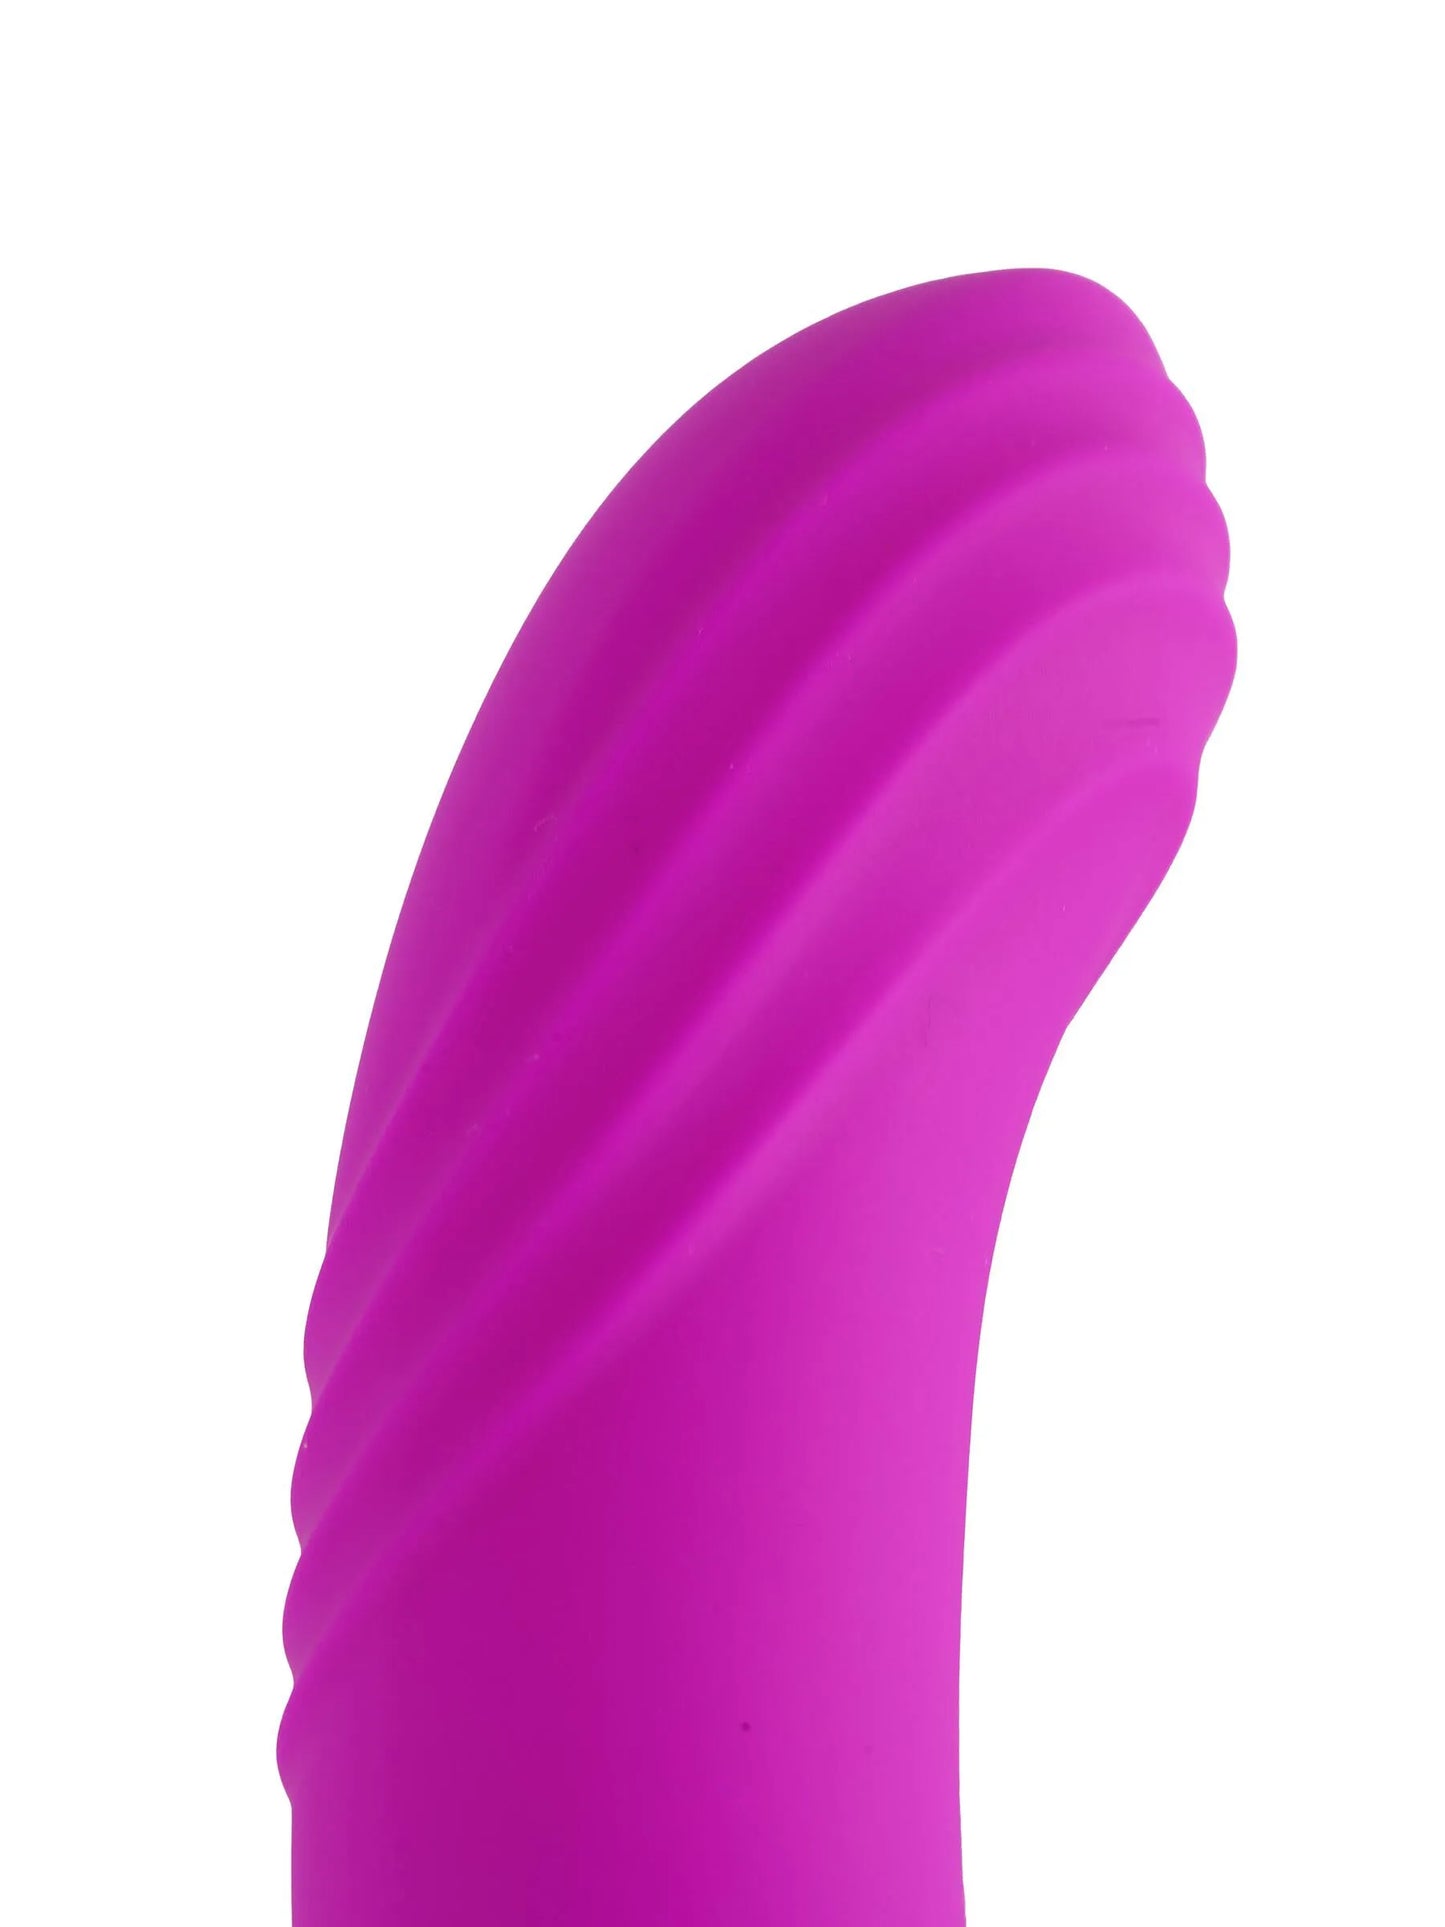 Moregasm Plus Boost G Spot From Ann Summers, Image 01